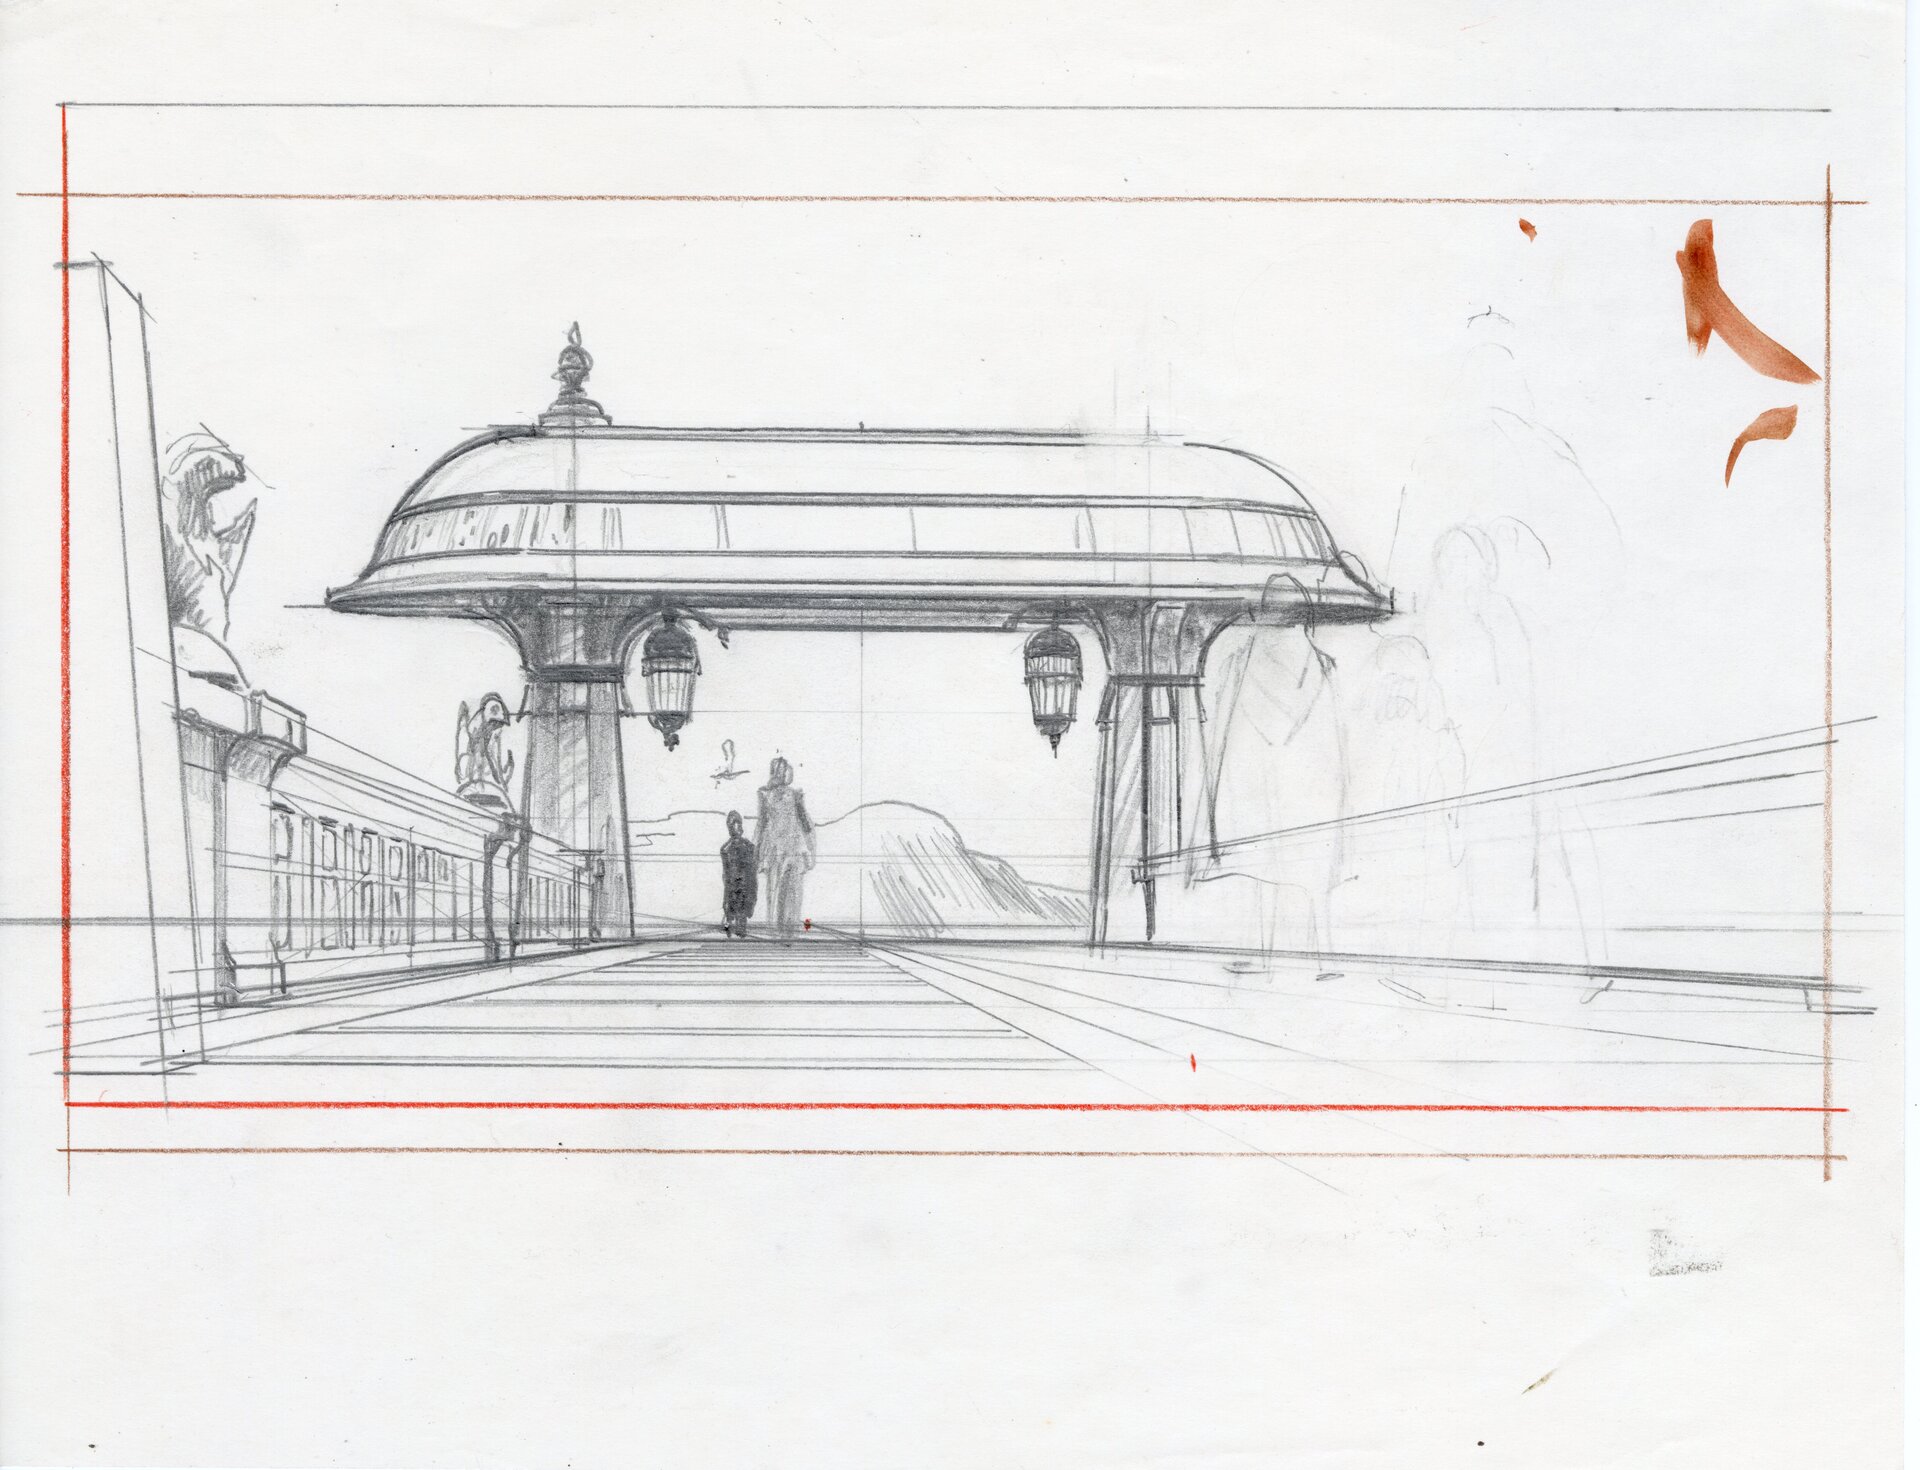 THE ILLUSTRATED STAR WARS UNIVERSE (1995) - Hand-Drawn Ralph McQuarrie Jabba's Palace Gate Concept S